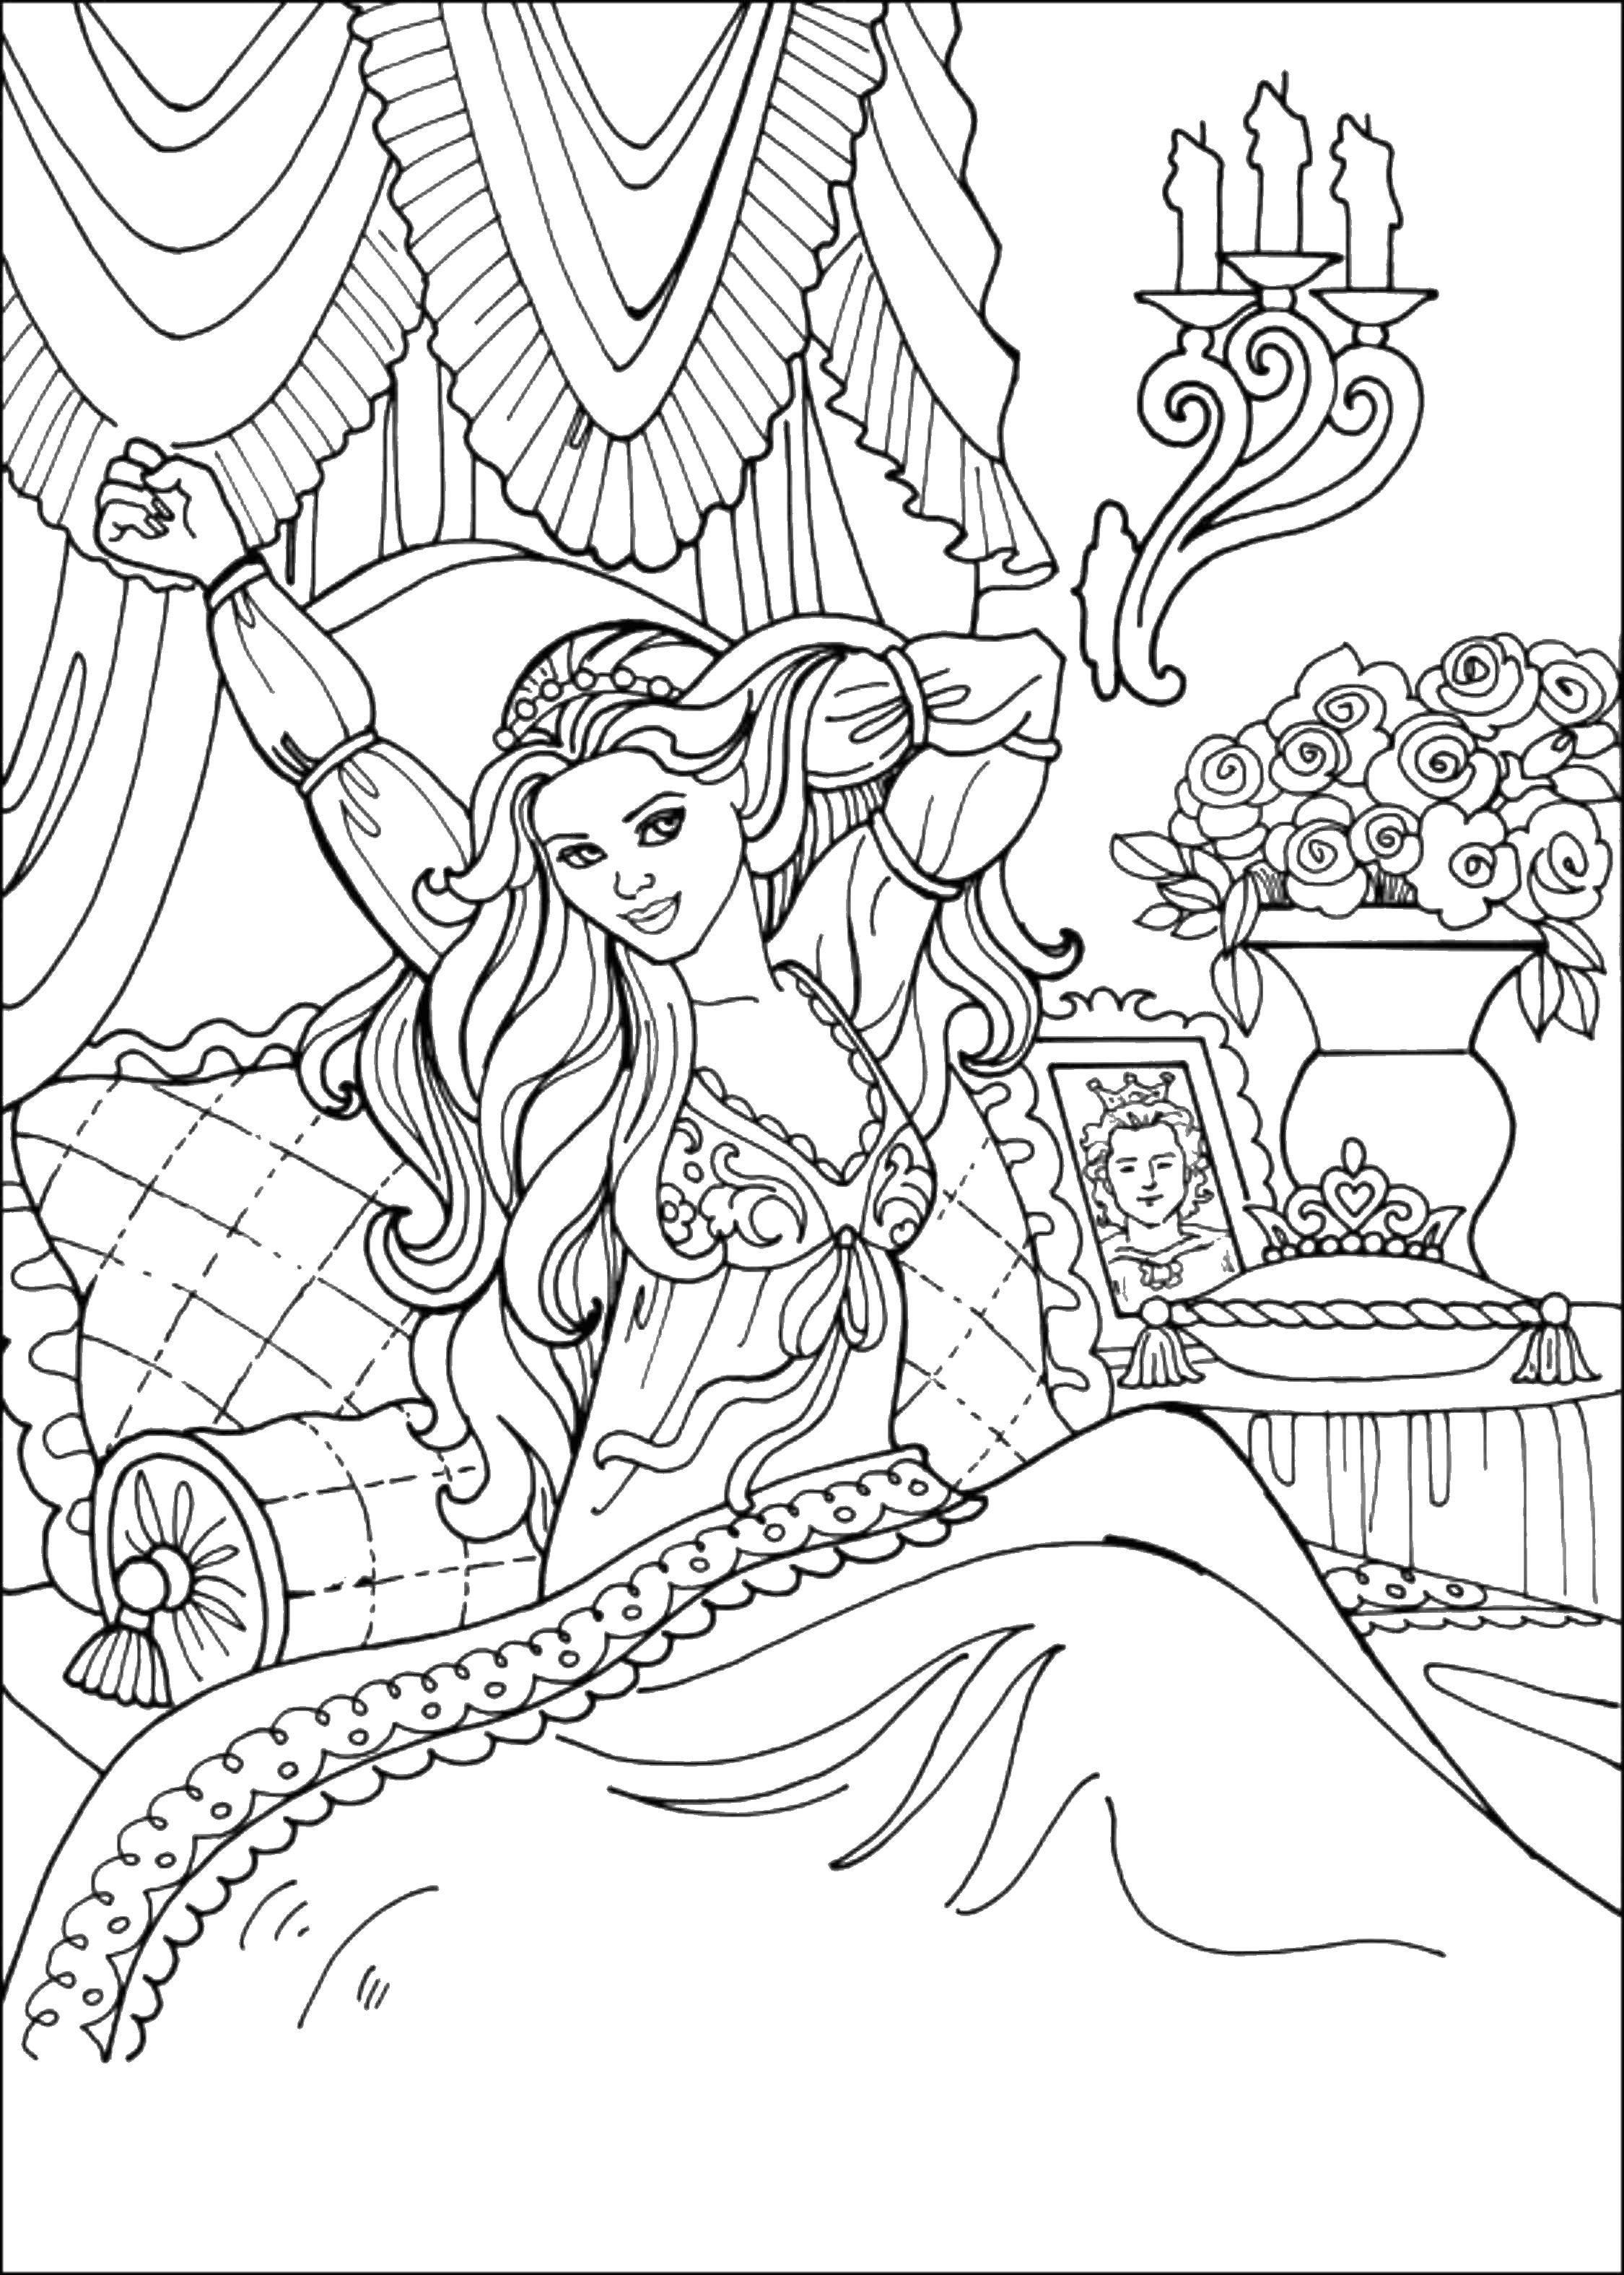 Coloring The Princess in her room. Category Princess. Tags:  Princess room, bedroom.